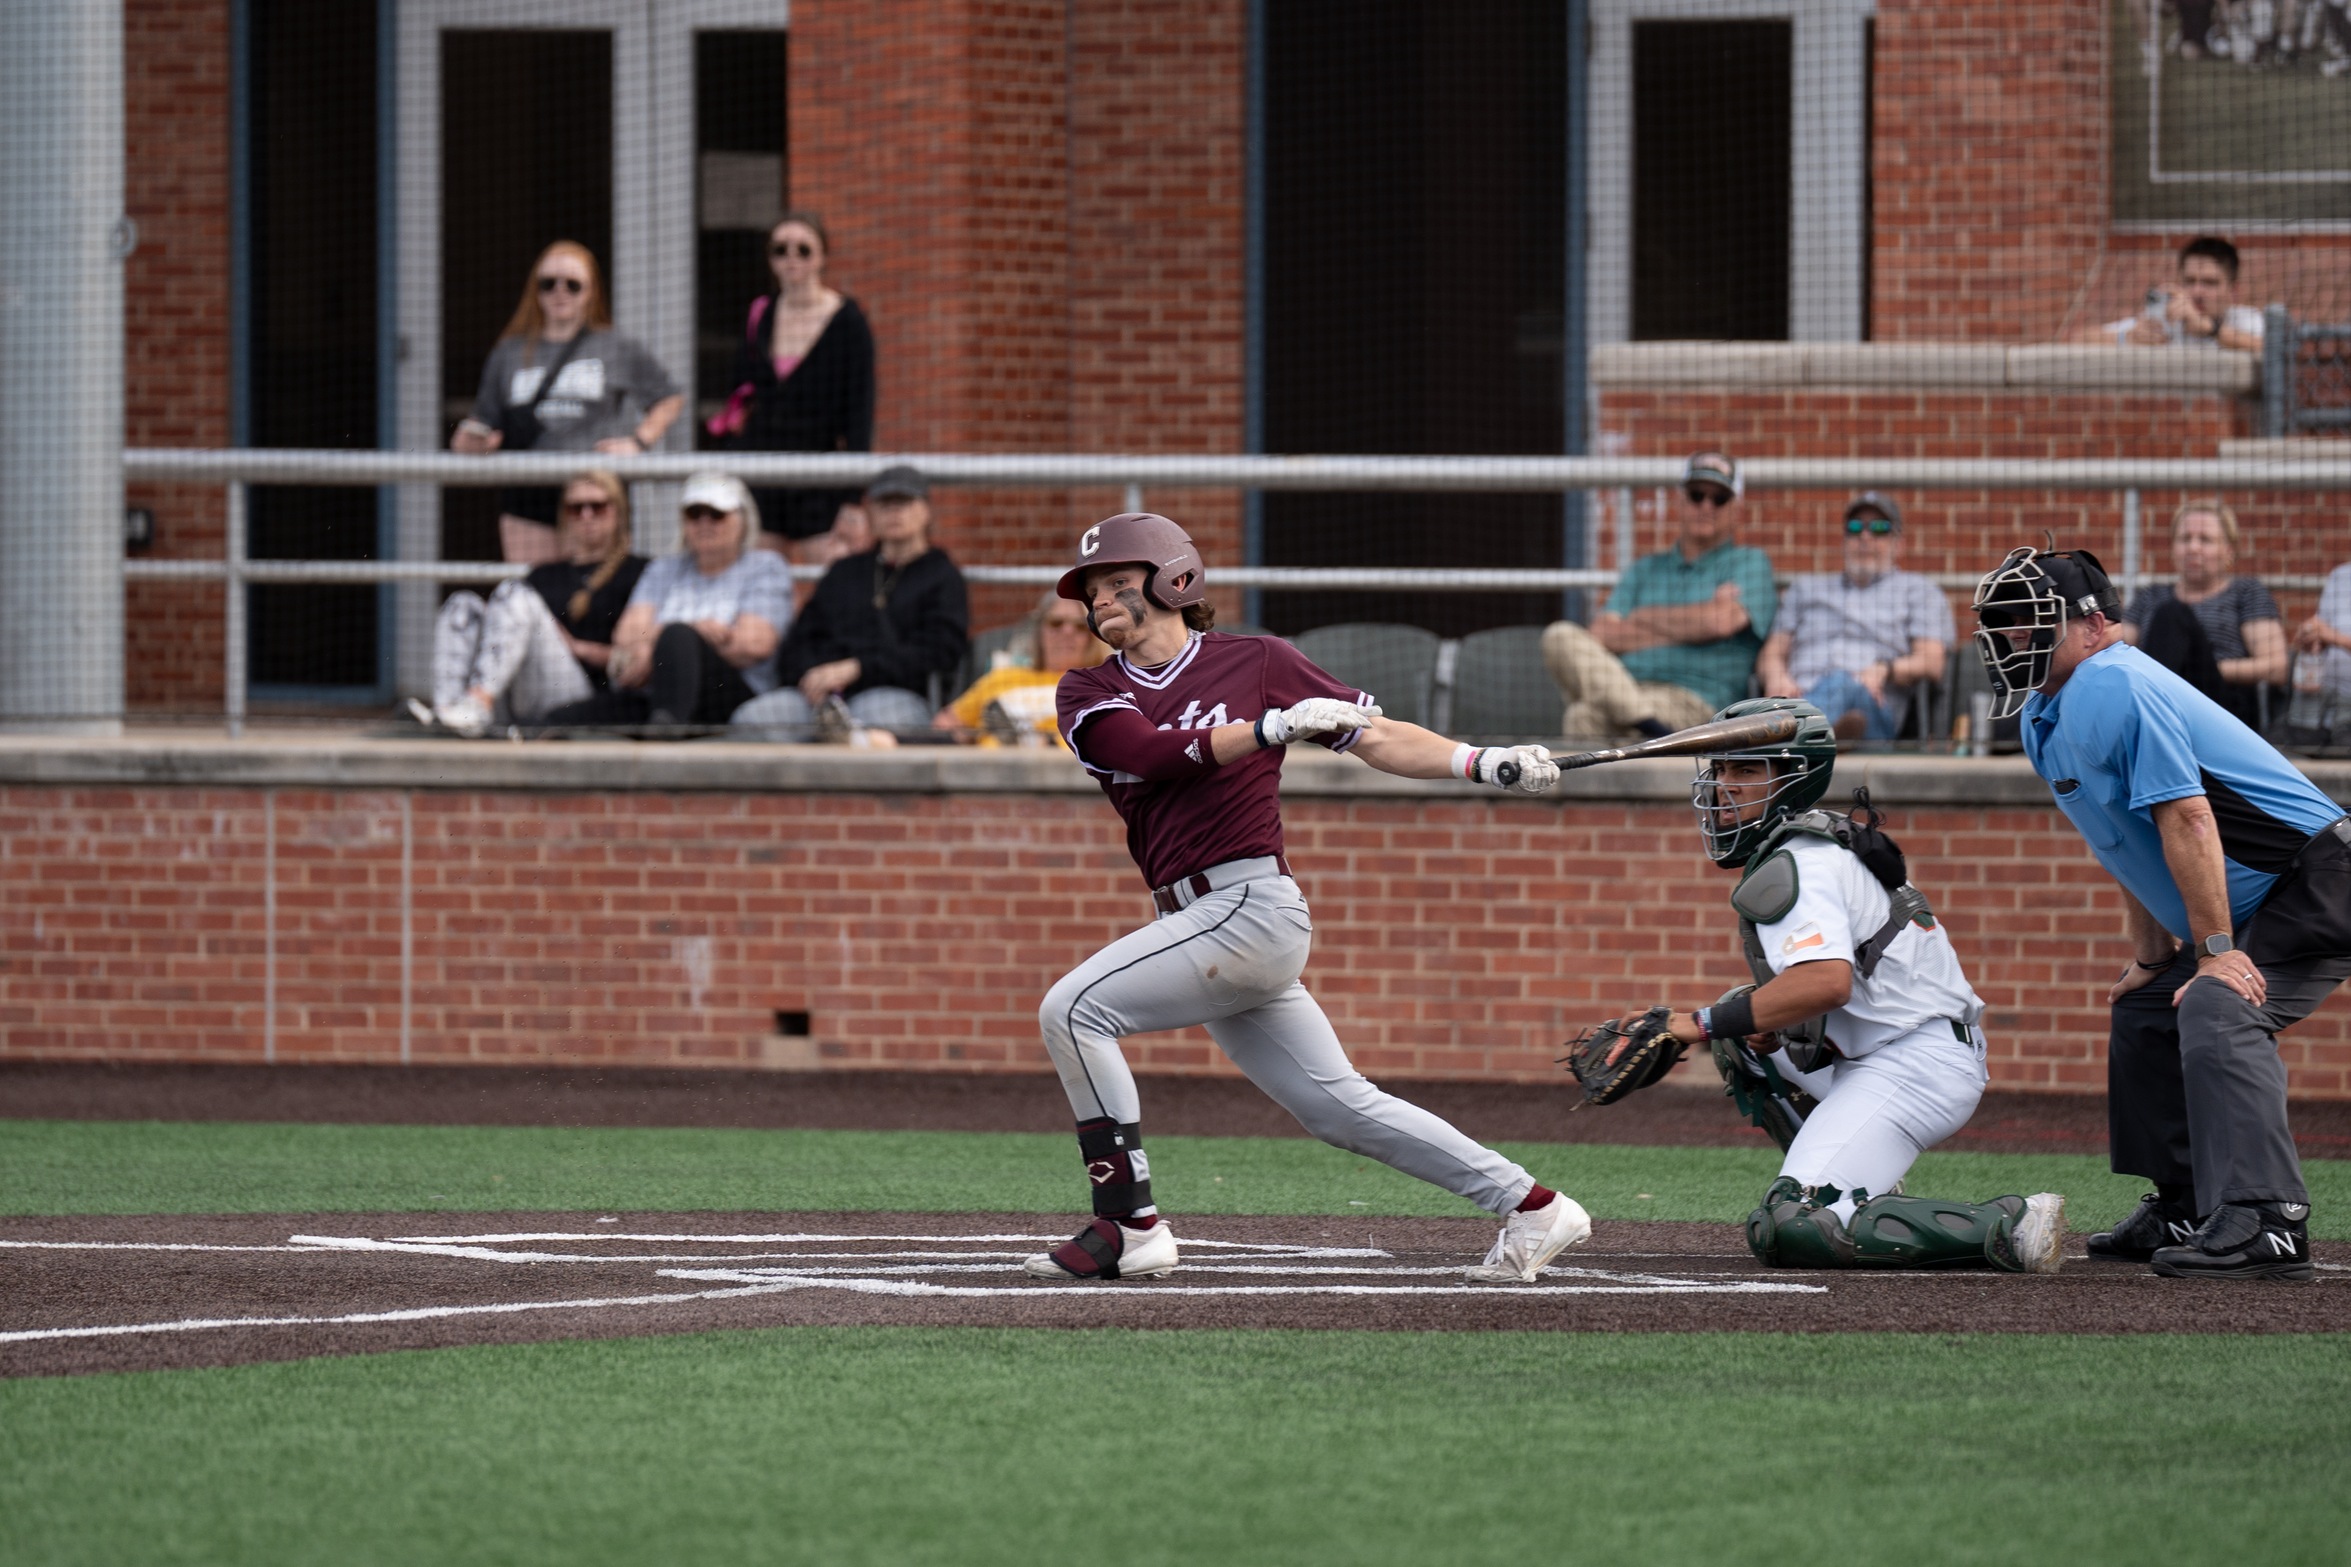 Centenary completed a series sweep over Austin College on Sunday.